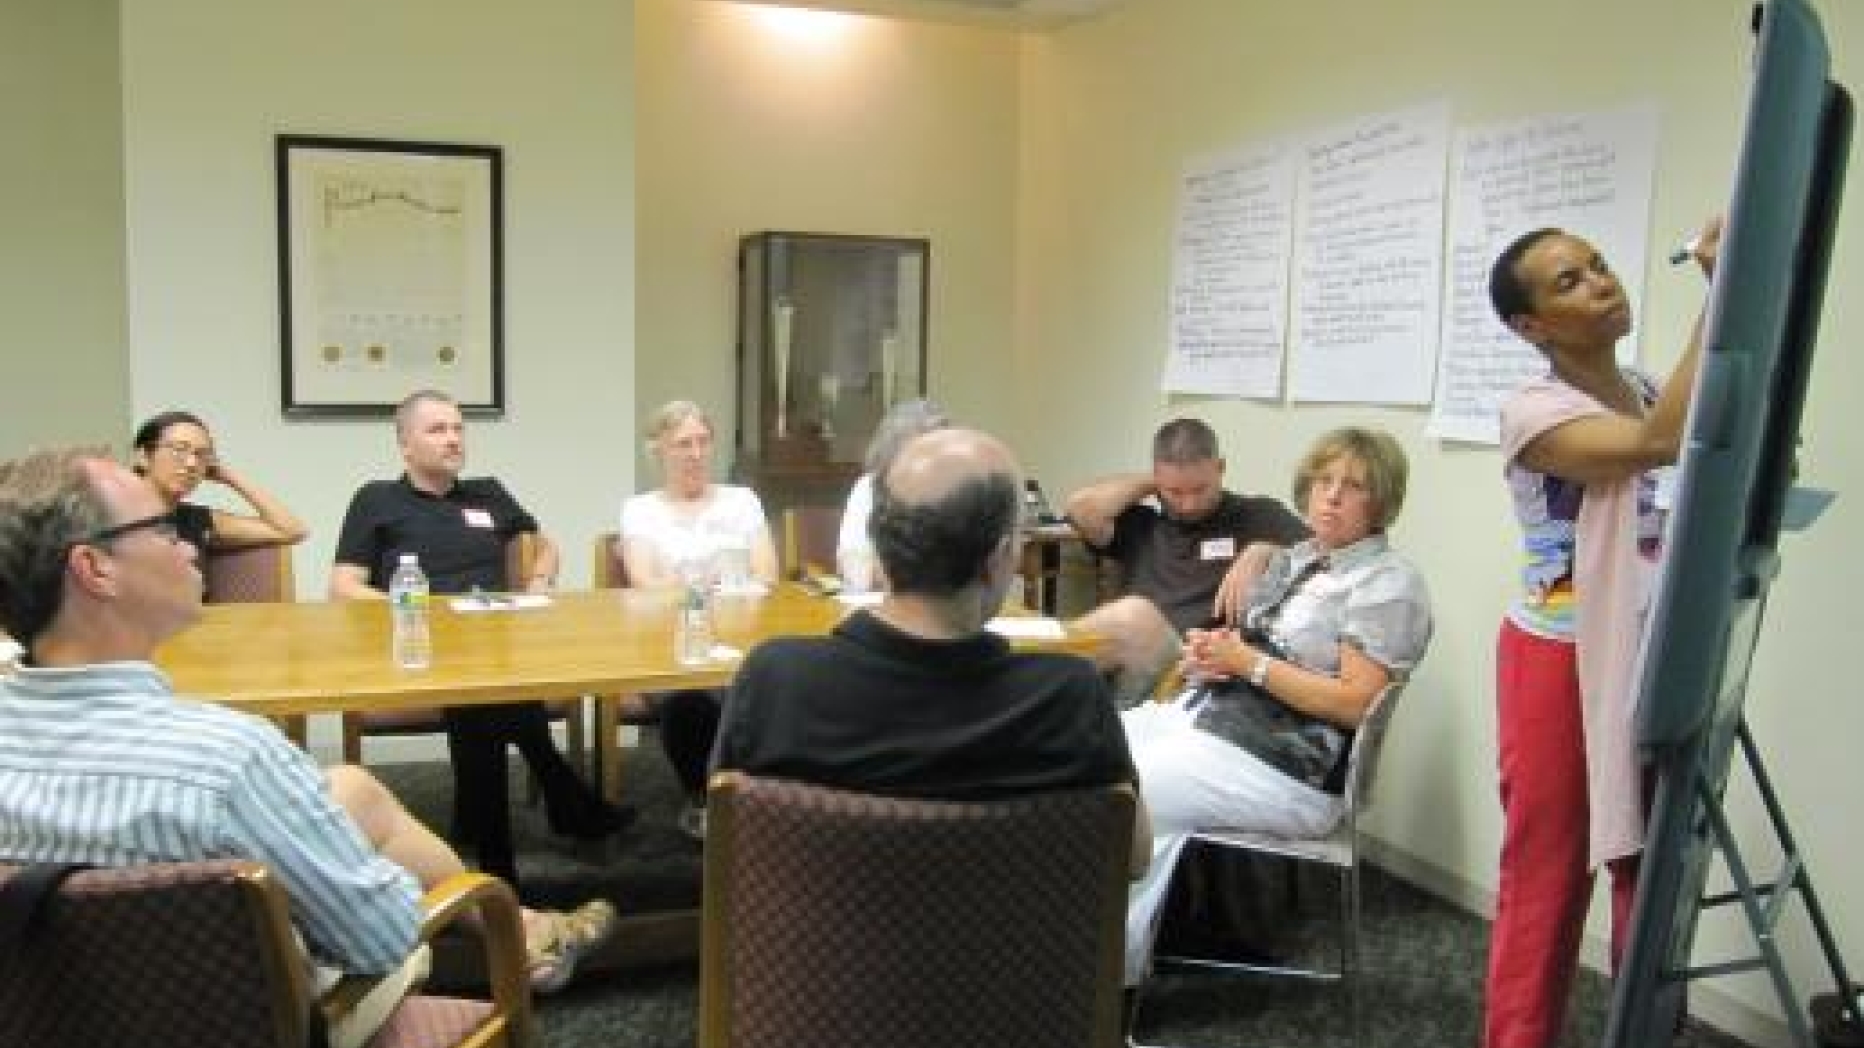 Group meets around a table with project ideas posted on the wall behind them. One woman is standing and writing further ideas on a drawing board.